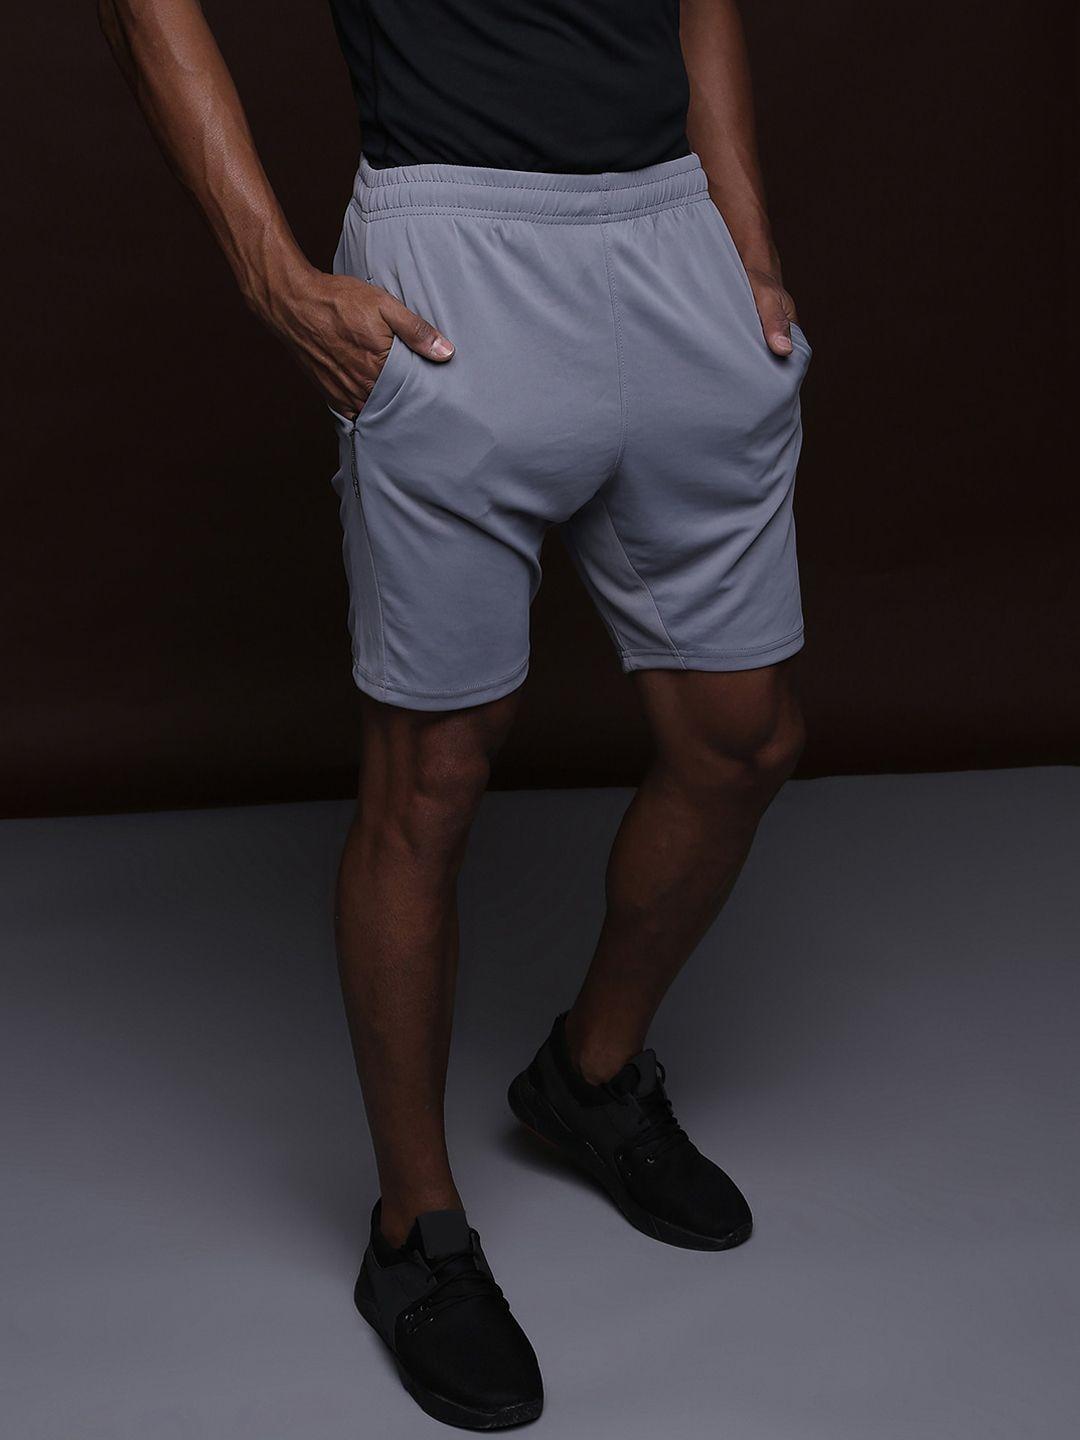 campus-sutra-men-grey-solid-above-knee-running-shorts